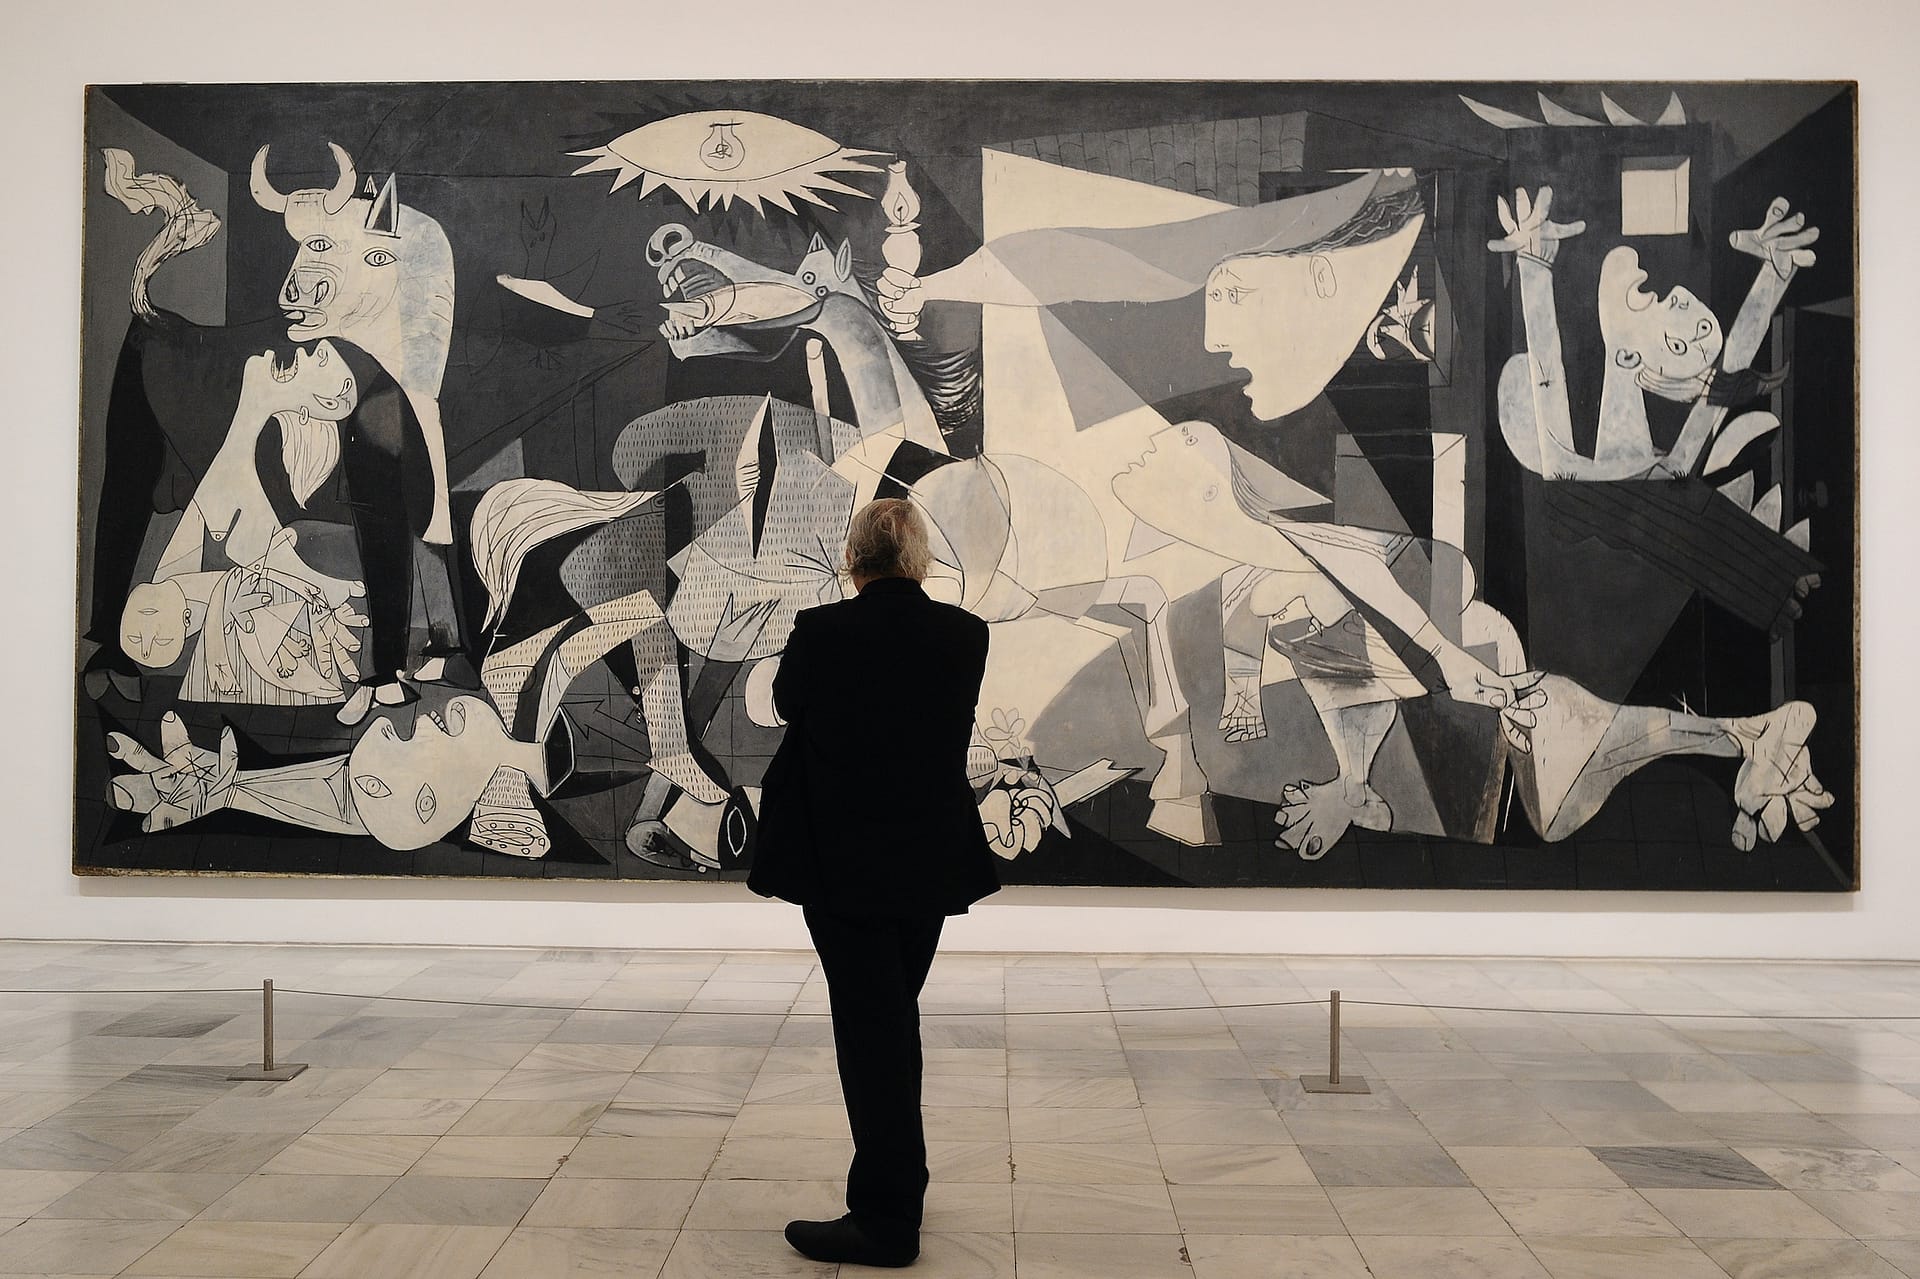 Museum Lifts Ban on Photographing Picasso’s “Guernica”